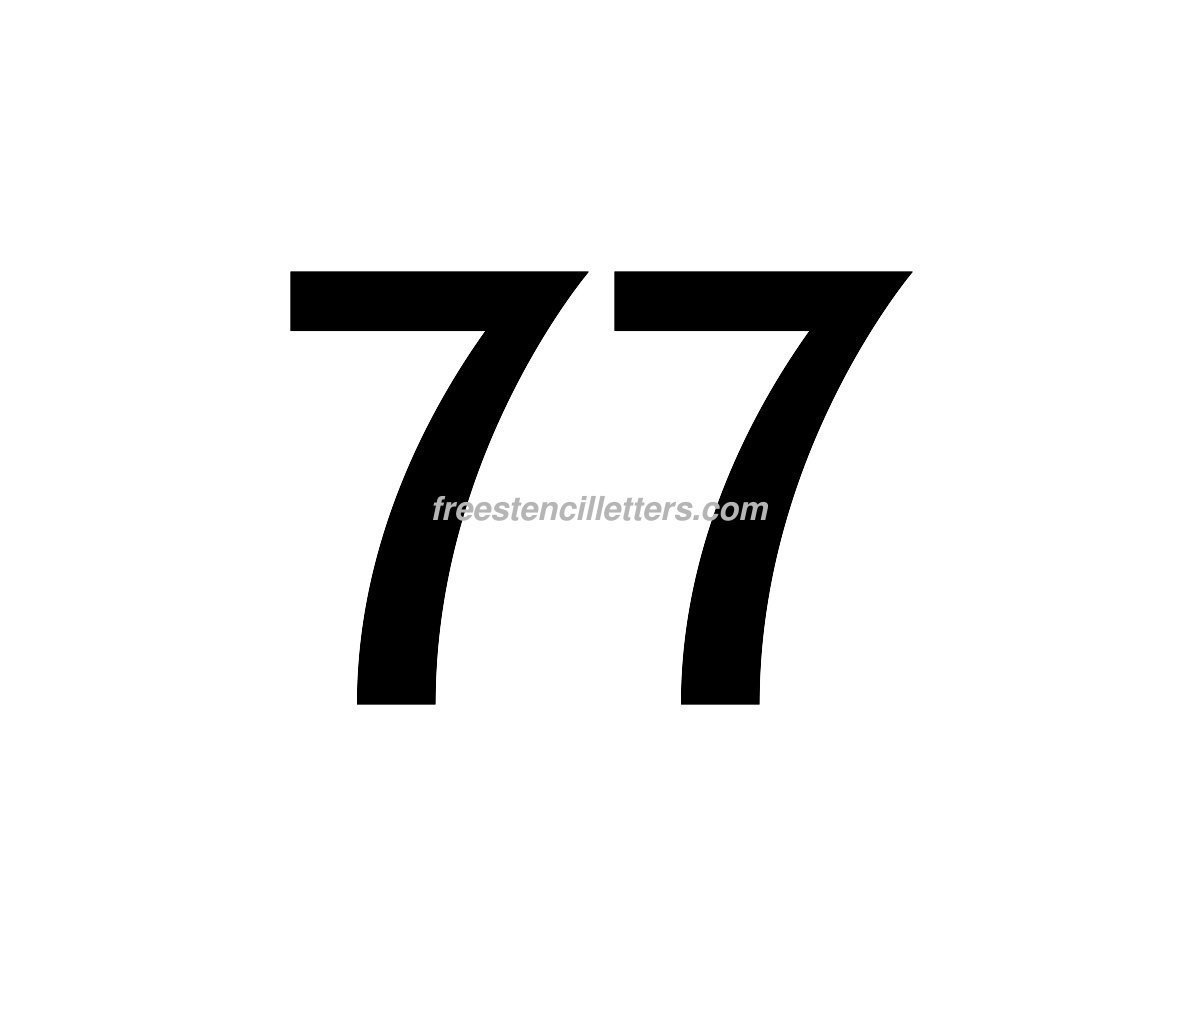 print-number-77-letter-stencil-free-stencil-letters